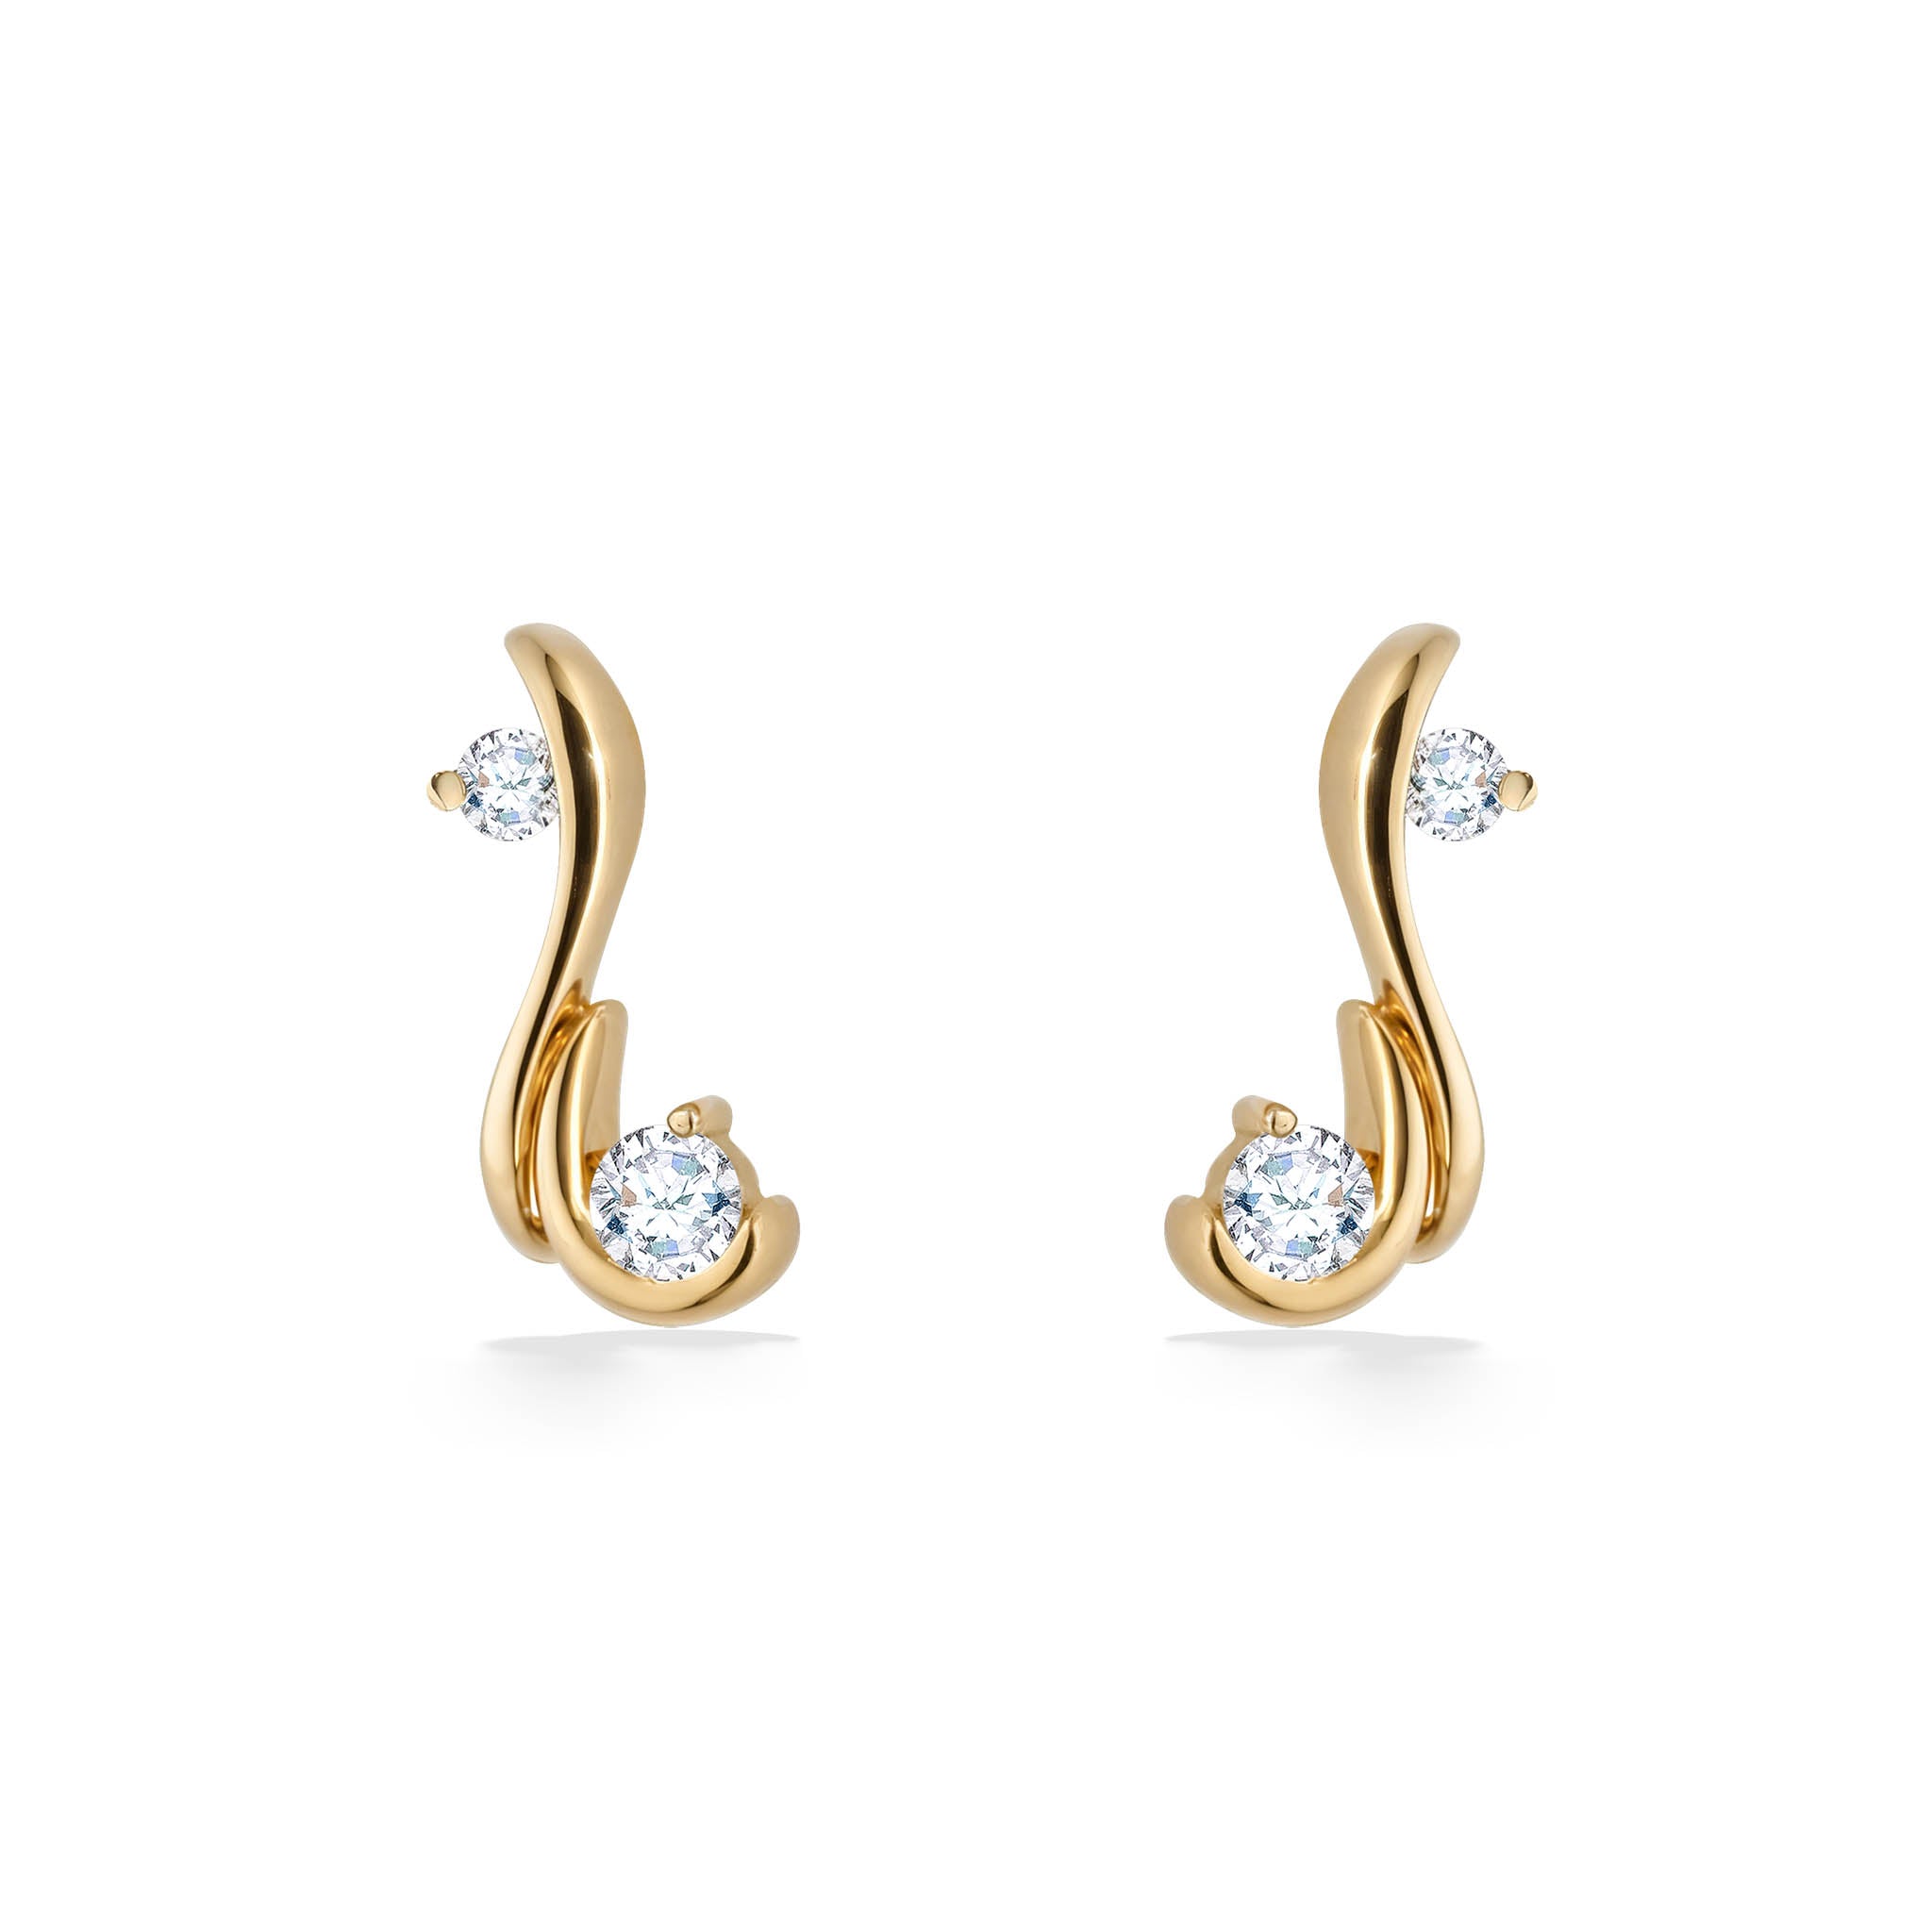 Stud Gold Earrings Designs With Price Starting - 3940 || stud earrings  designs with price || - YouTube